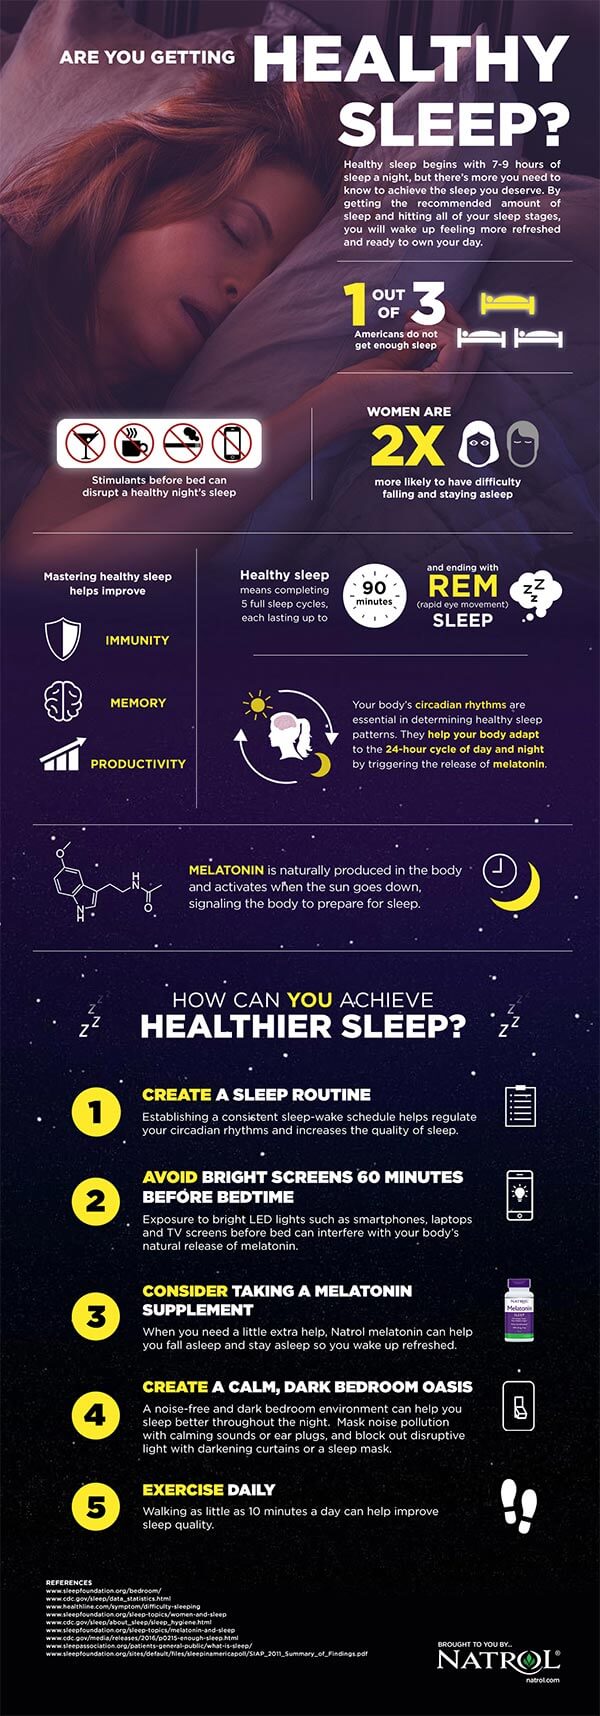 ‘Are you Getting Healthy Sleep?’ infographic